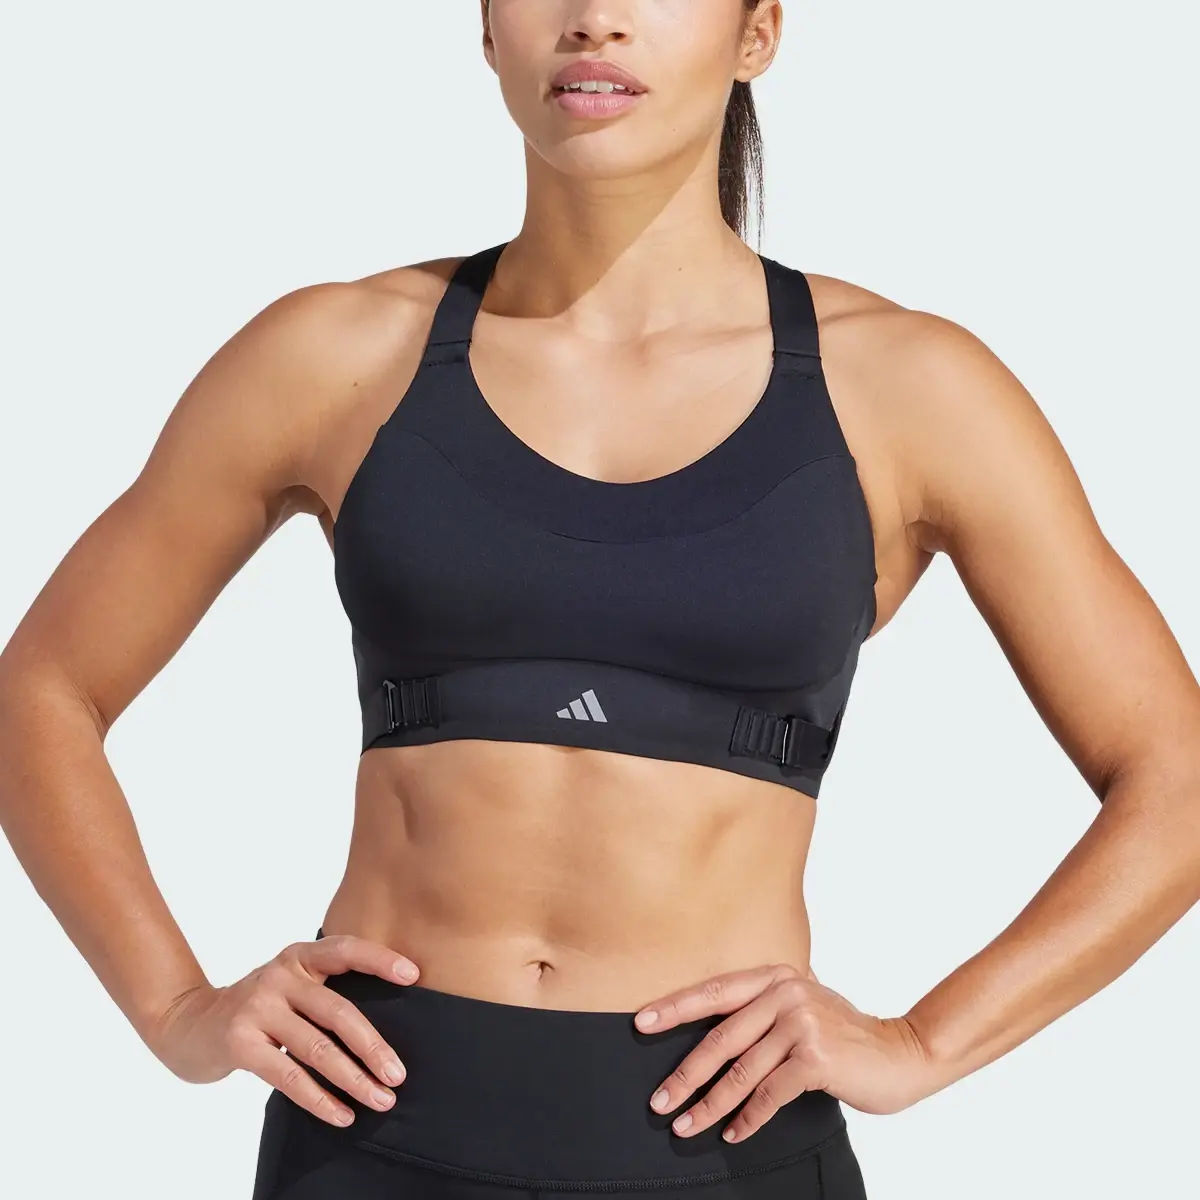 Adidas Brassière Collective Power Fastimpact Luxe Maintien fort. 1